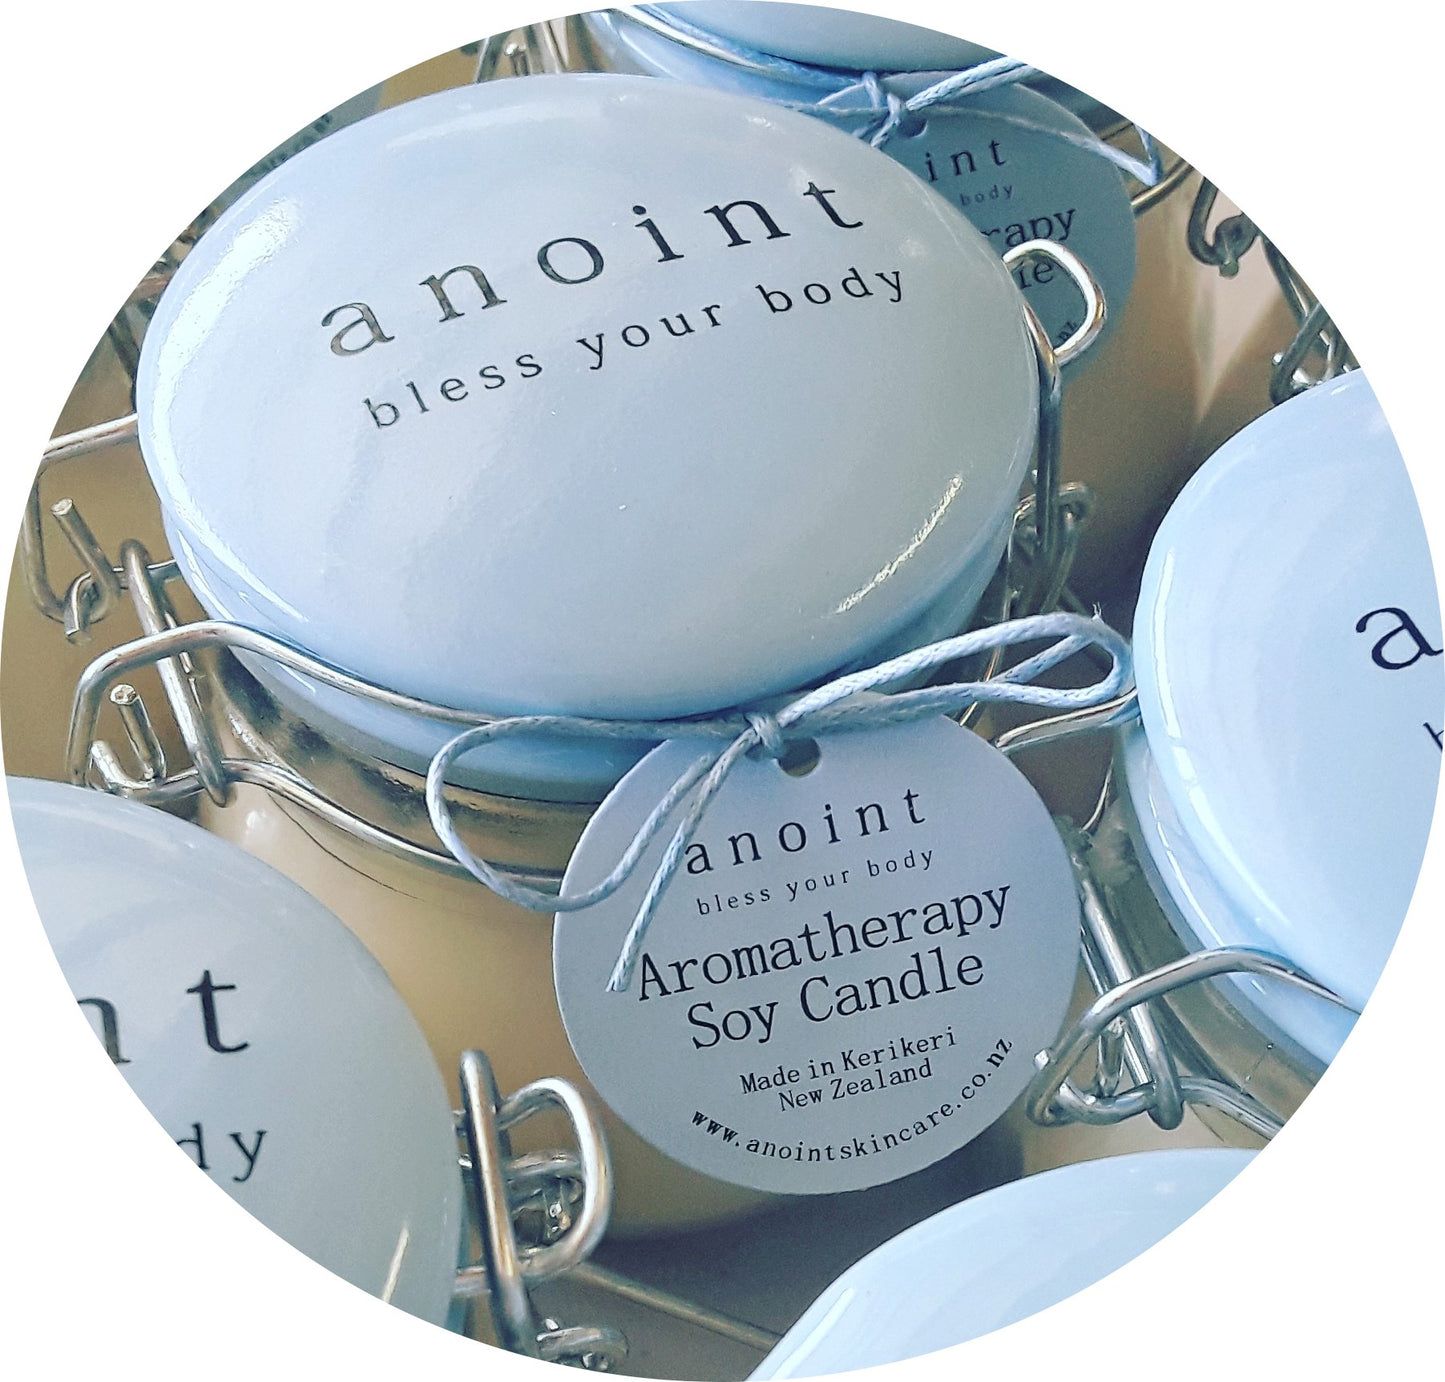 Anoint Aromatherapy Soy Candles